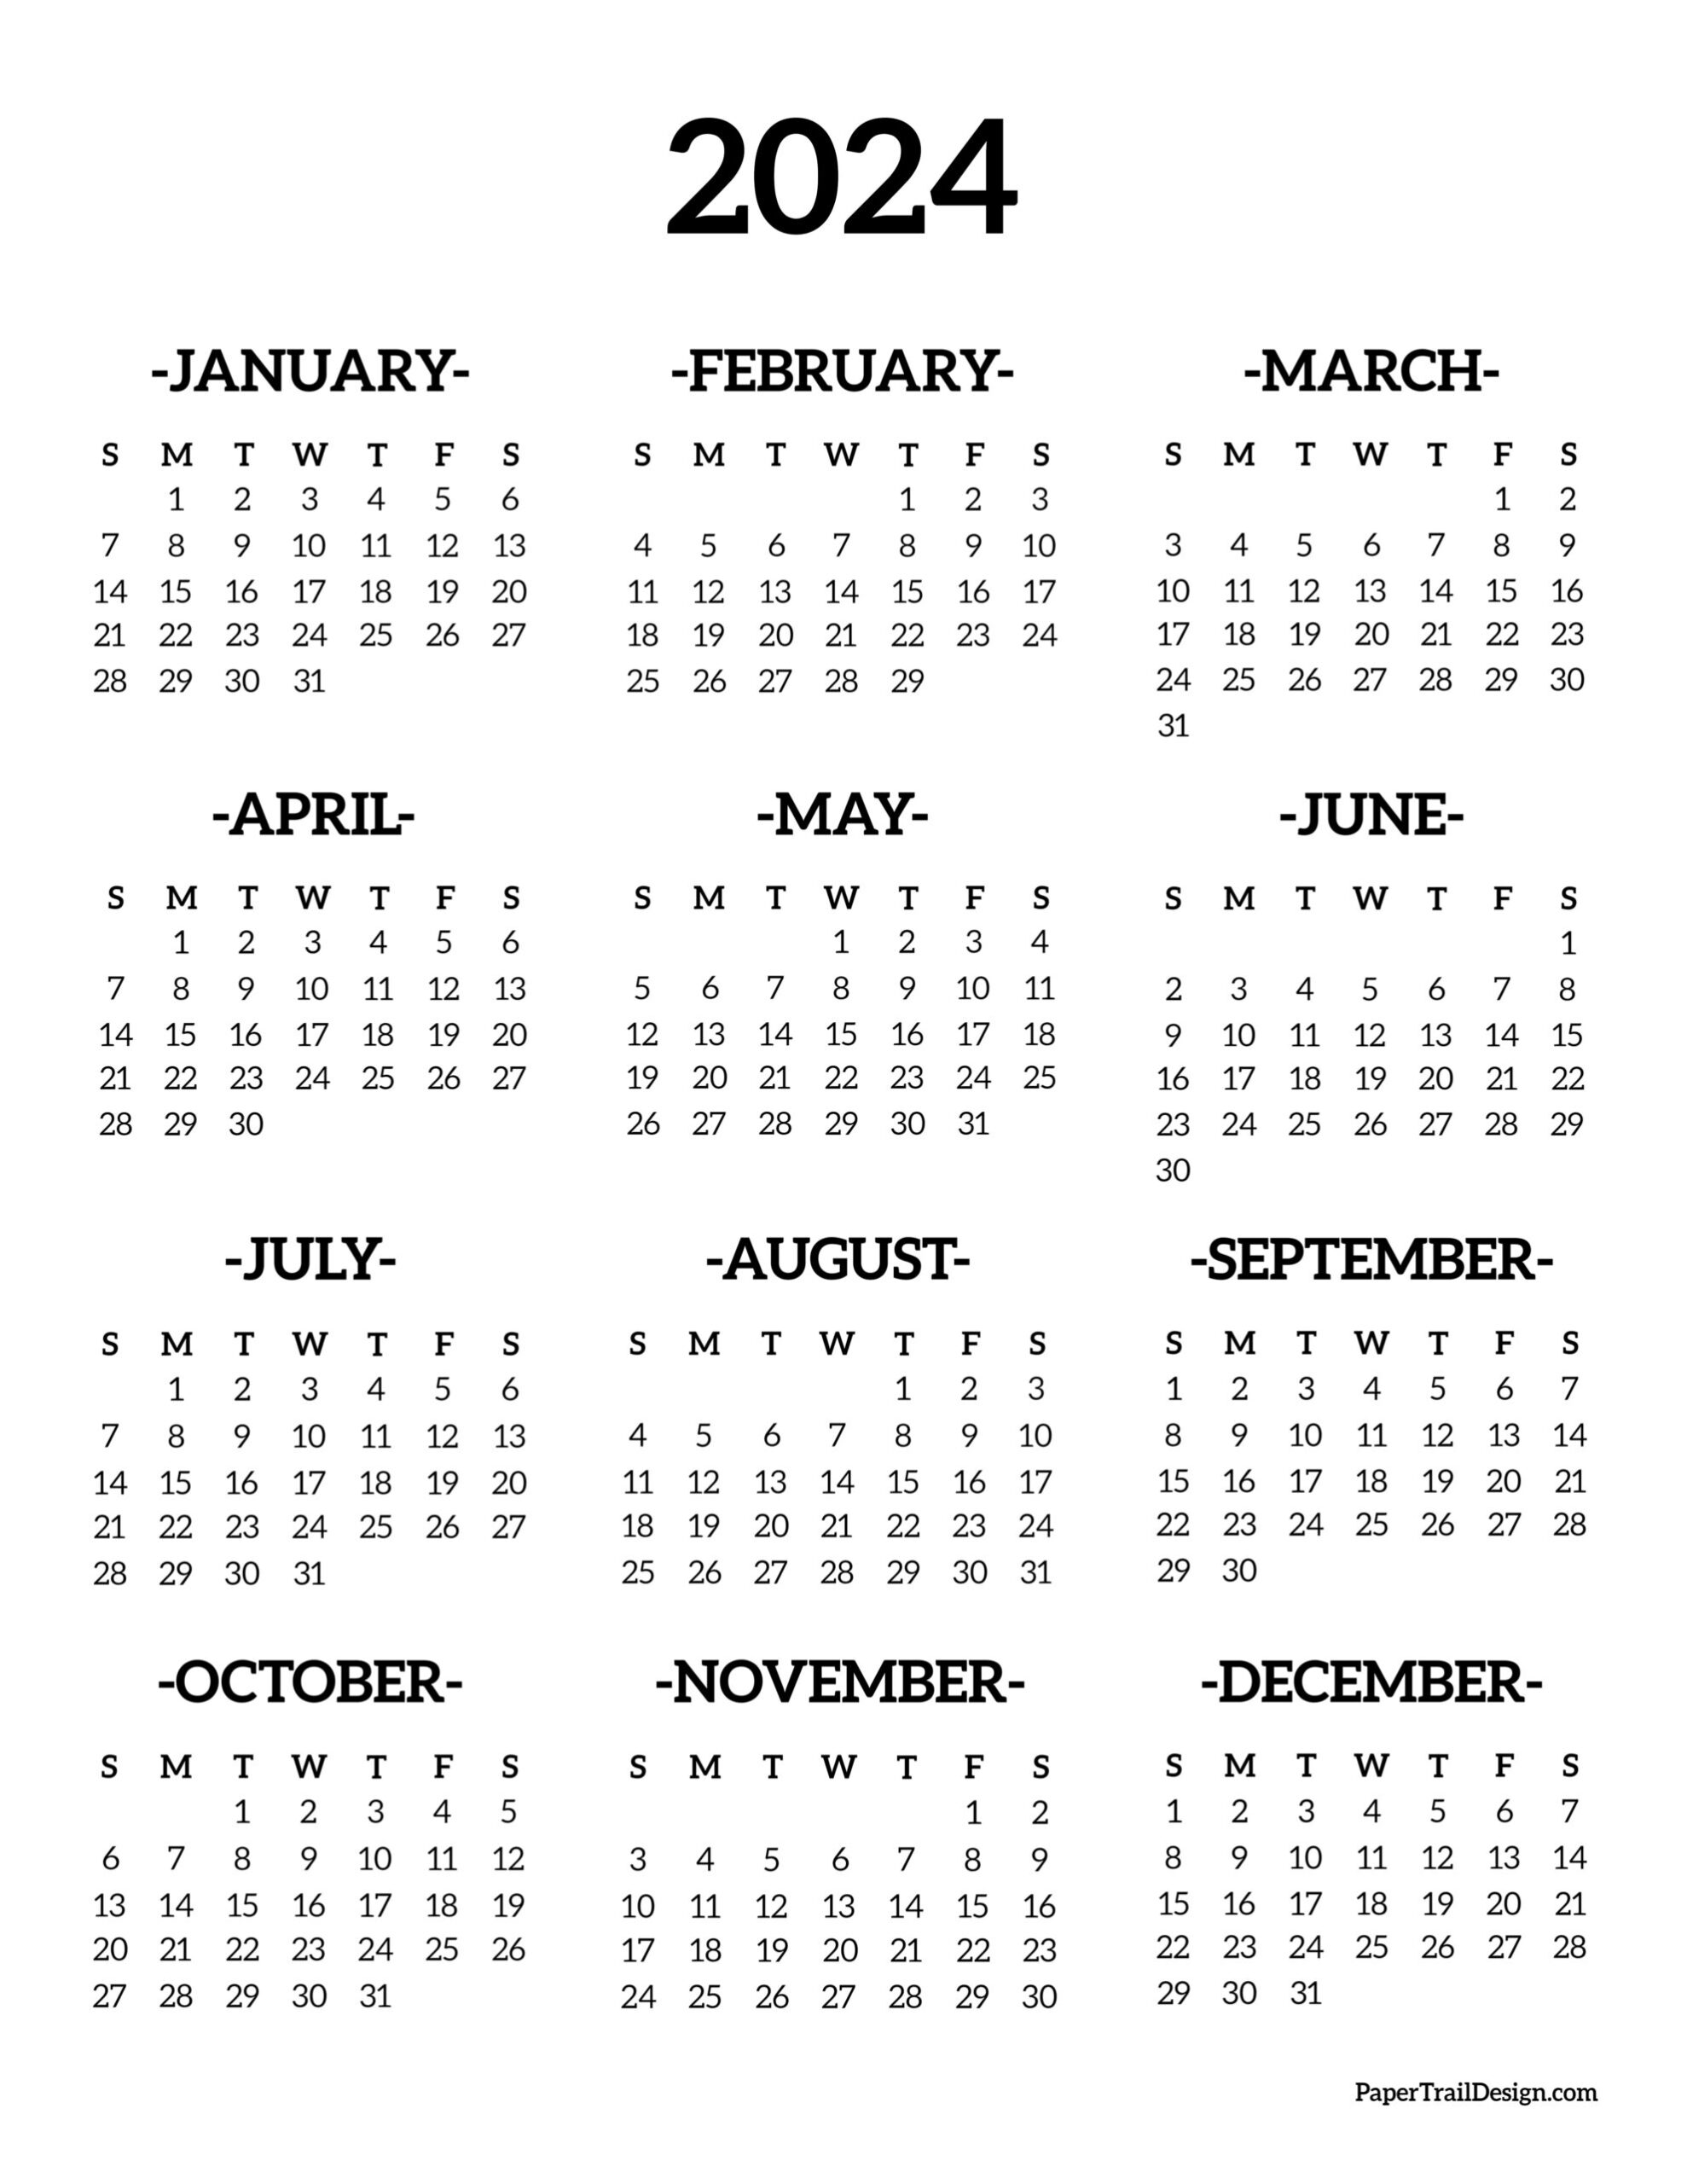 Calendar 2024 Printable One Page - Paper Trail Design for Printable Yearly 2024 Calendar